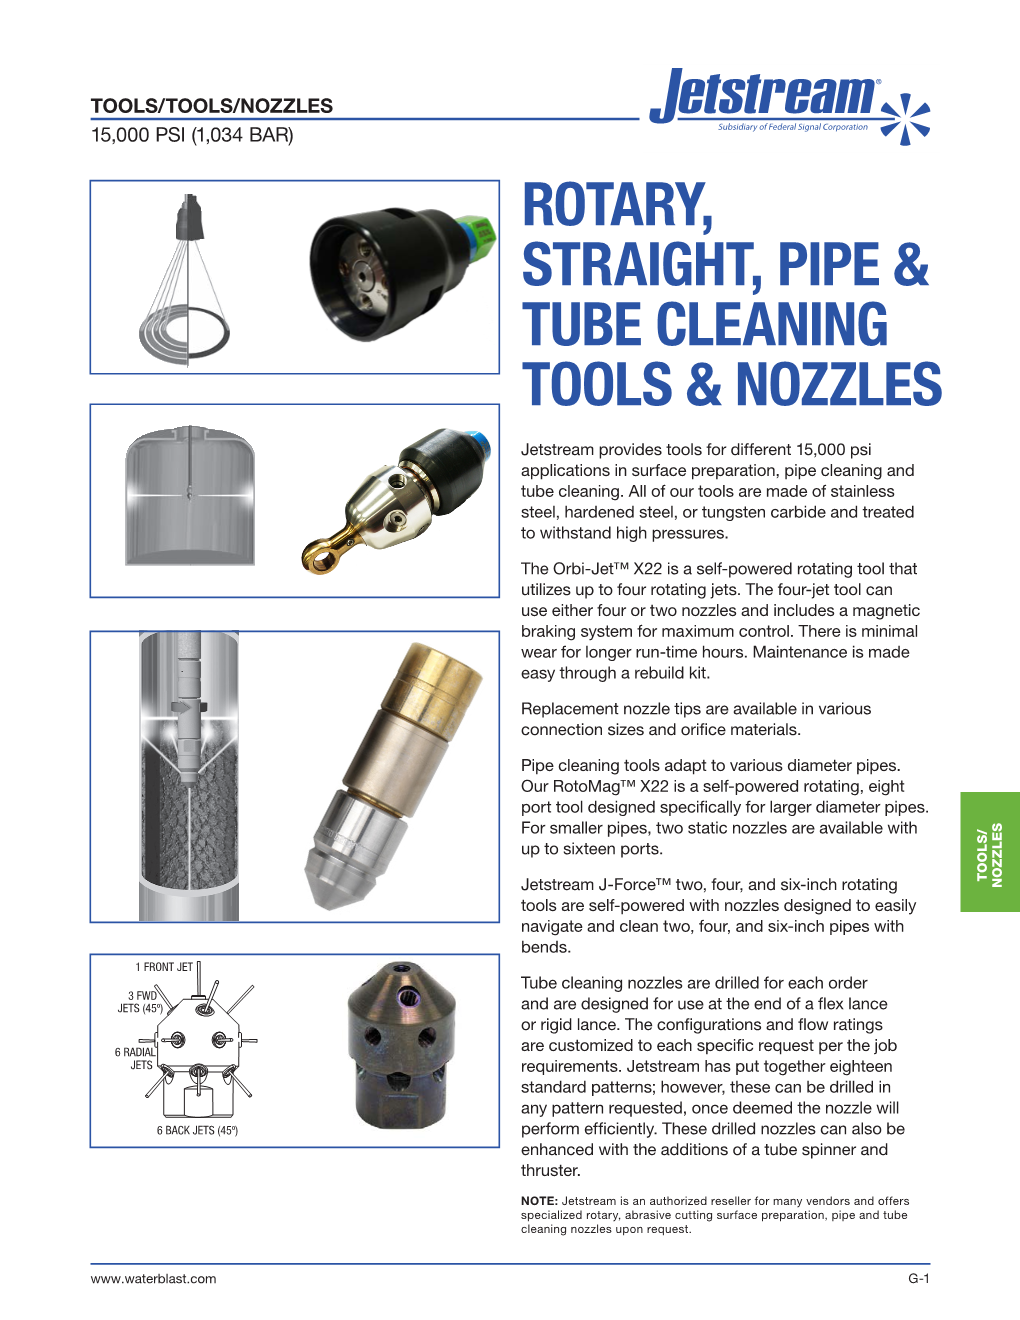 Rotary, Straight, Pipe & Tube Cleaning Tools & Nozzles